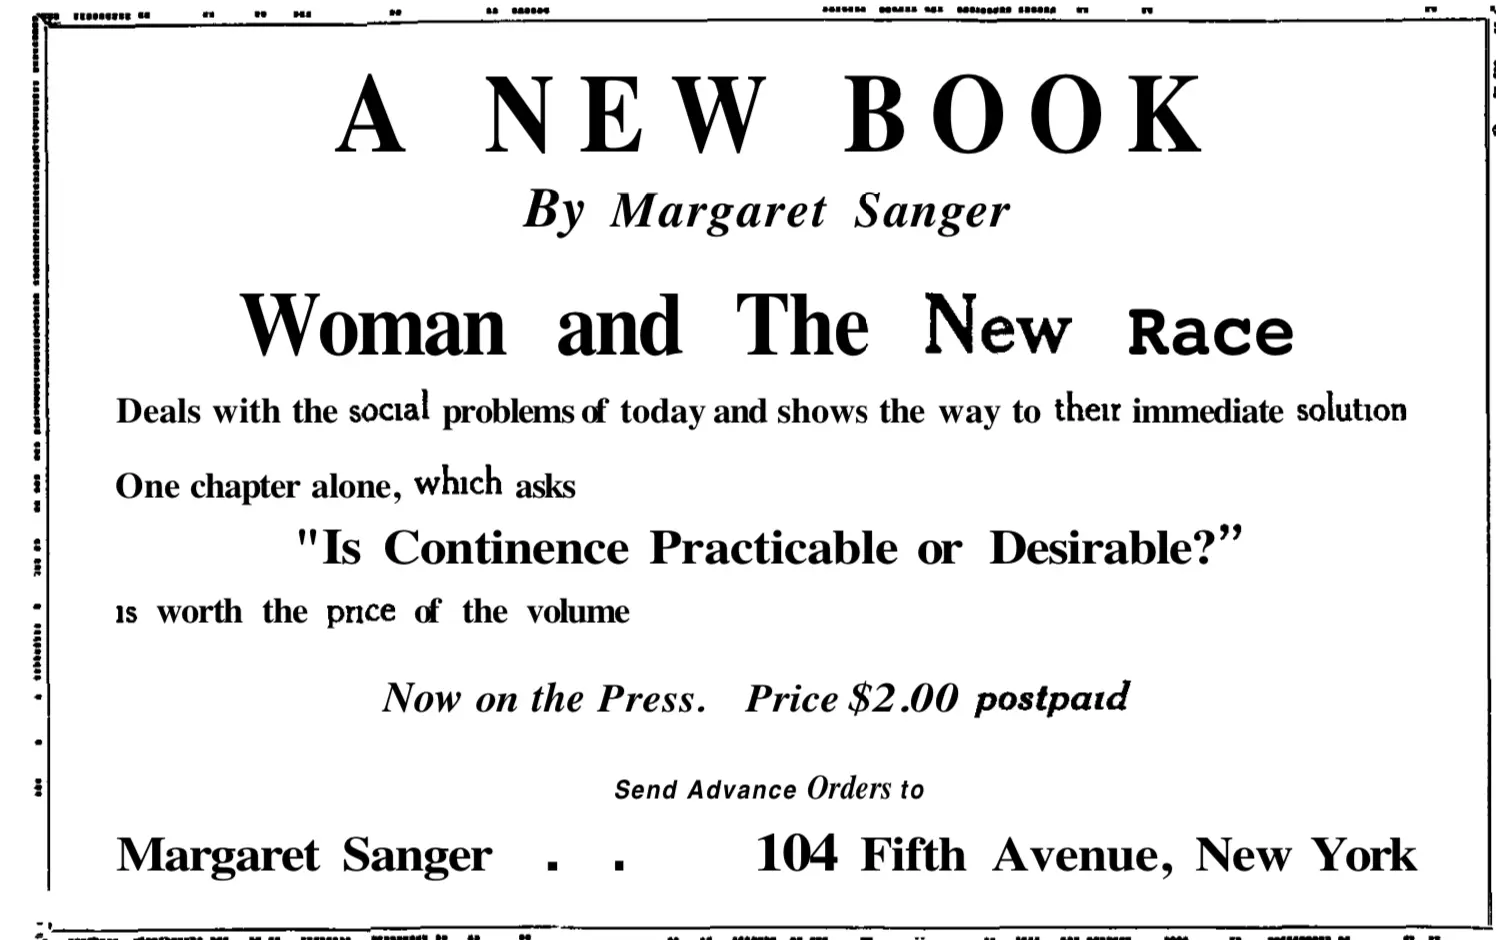 birth control review advertisement july 1920